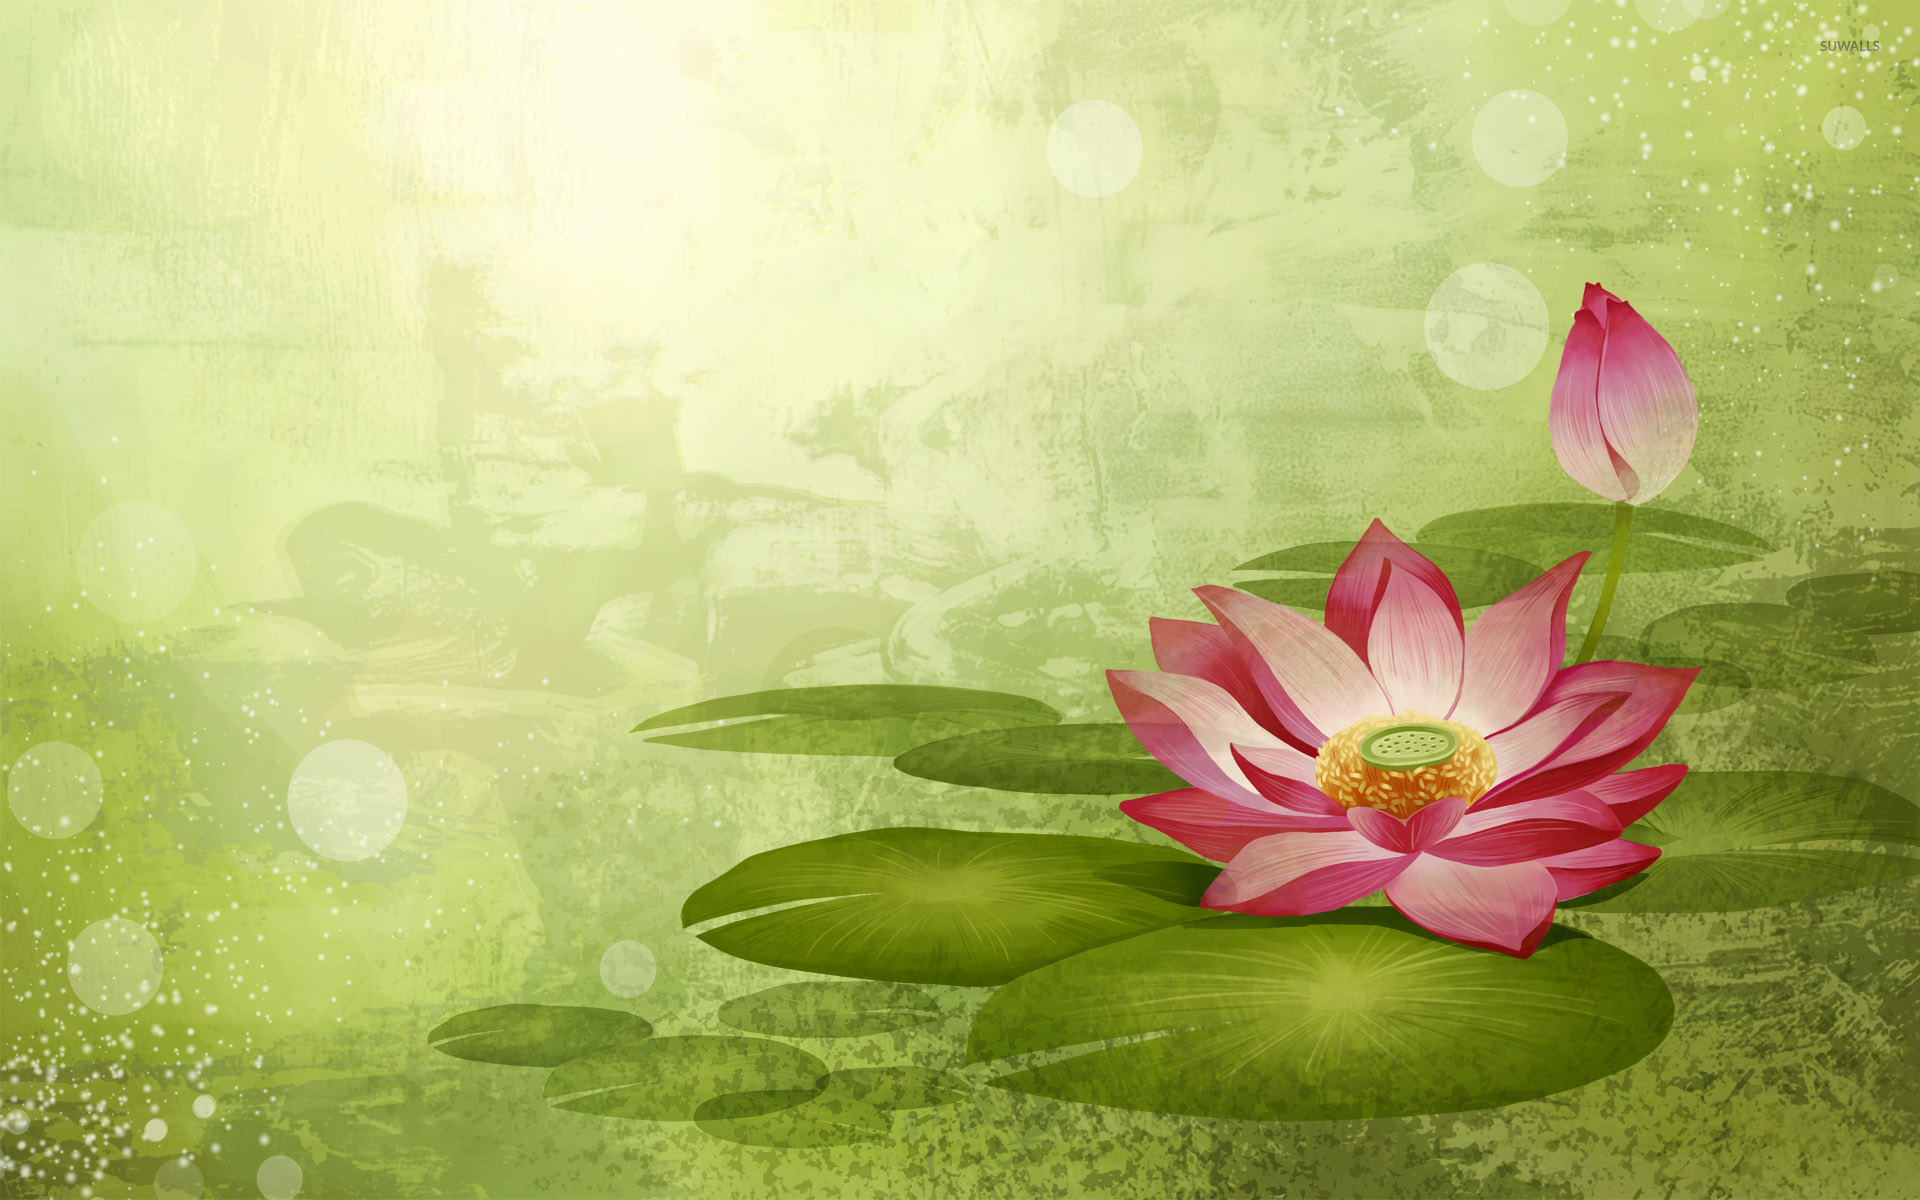 Water Lily wallpaper - Artistic wallpapers - #4299